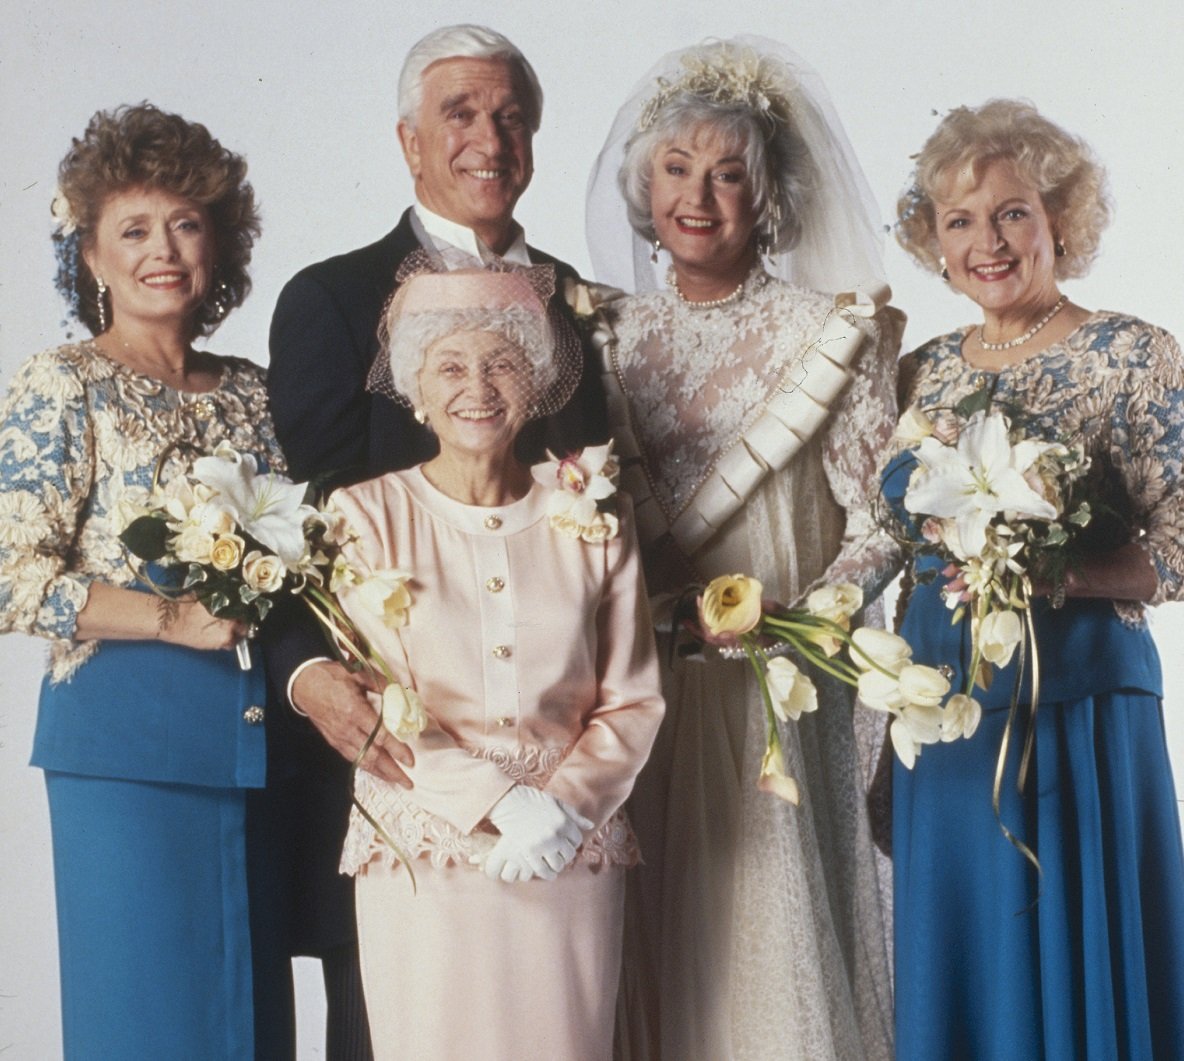 Blanche, Sophia, Lucas Hollingsworth, Dorothy and Rose pose in a wedding promo for the finale of 'The Golden Girls'